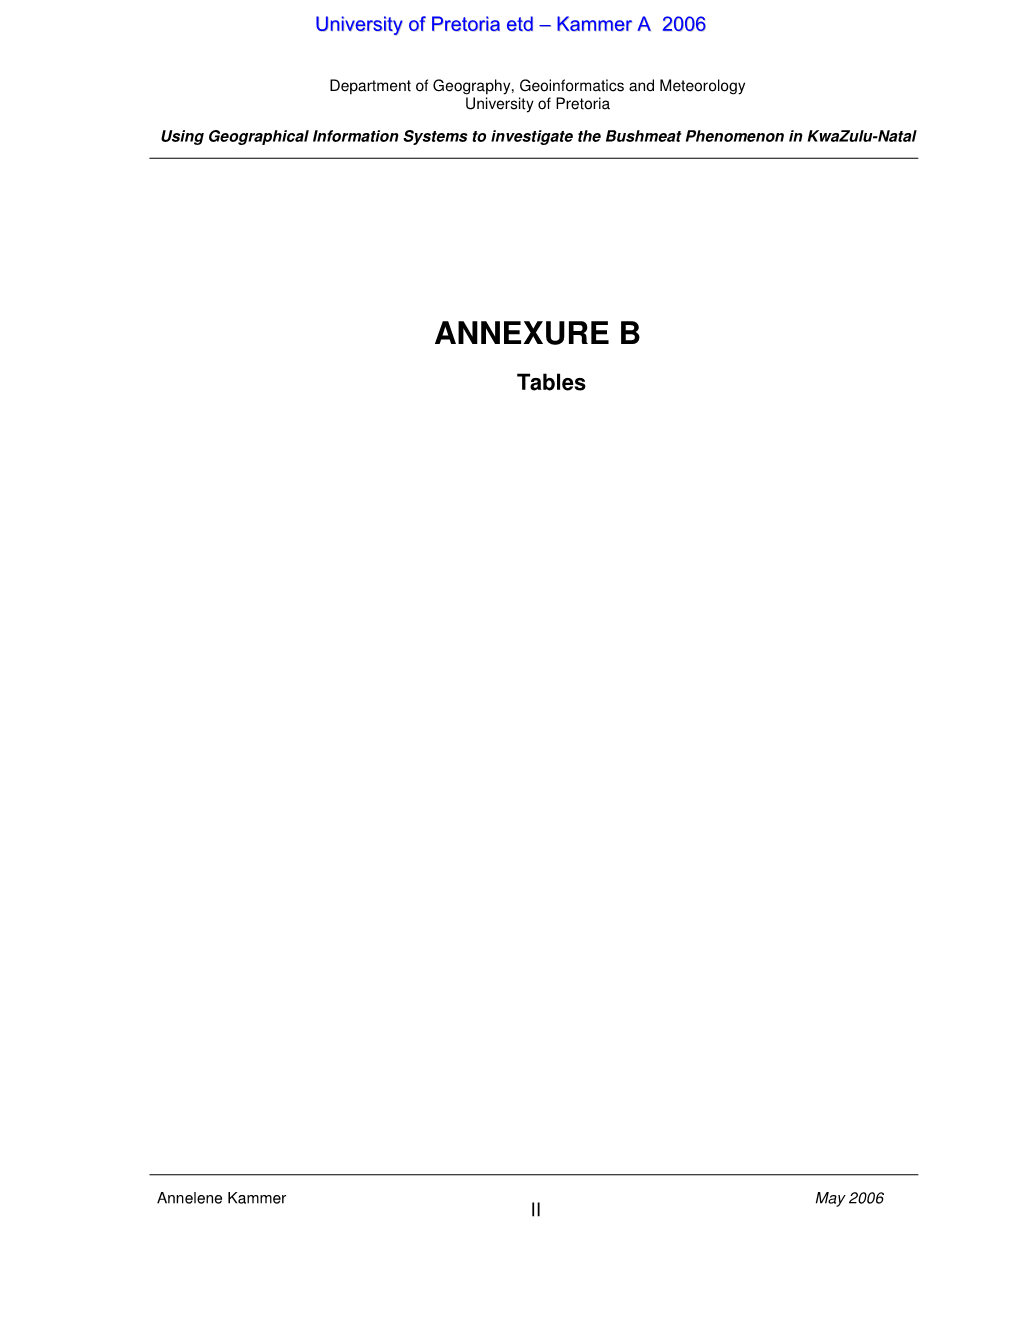 ANNEXURE B Tables